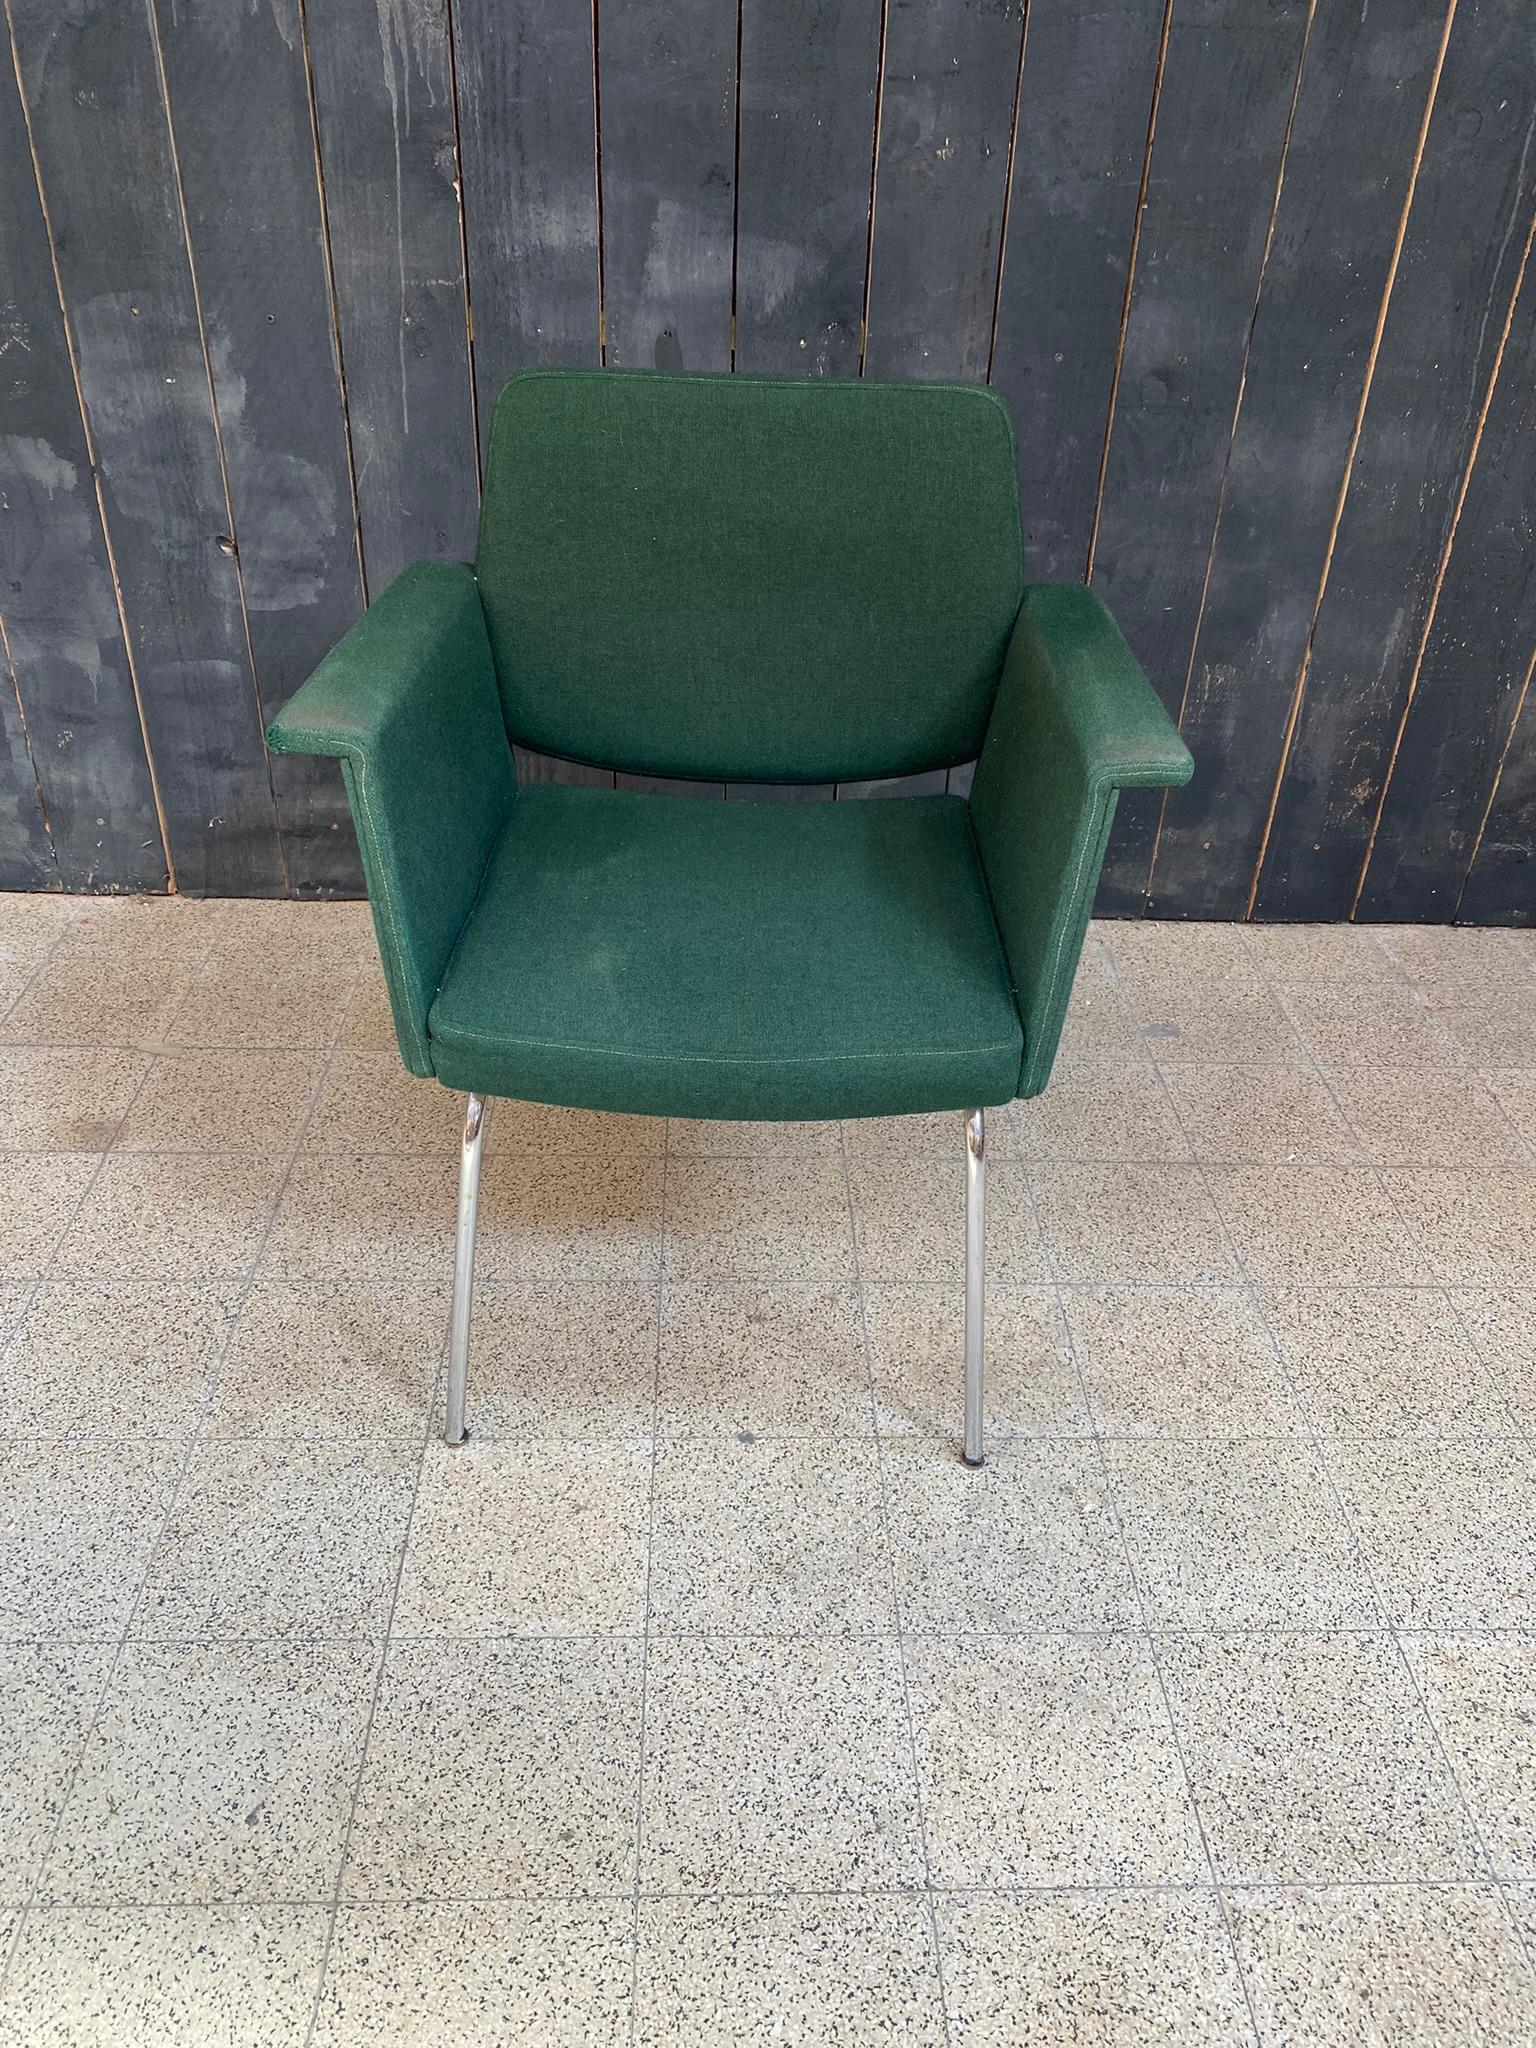 Armchair circa 1960 attributed to Steiner.
Coating to change.